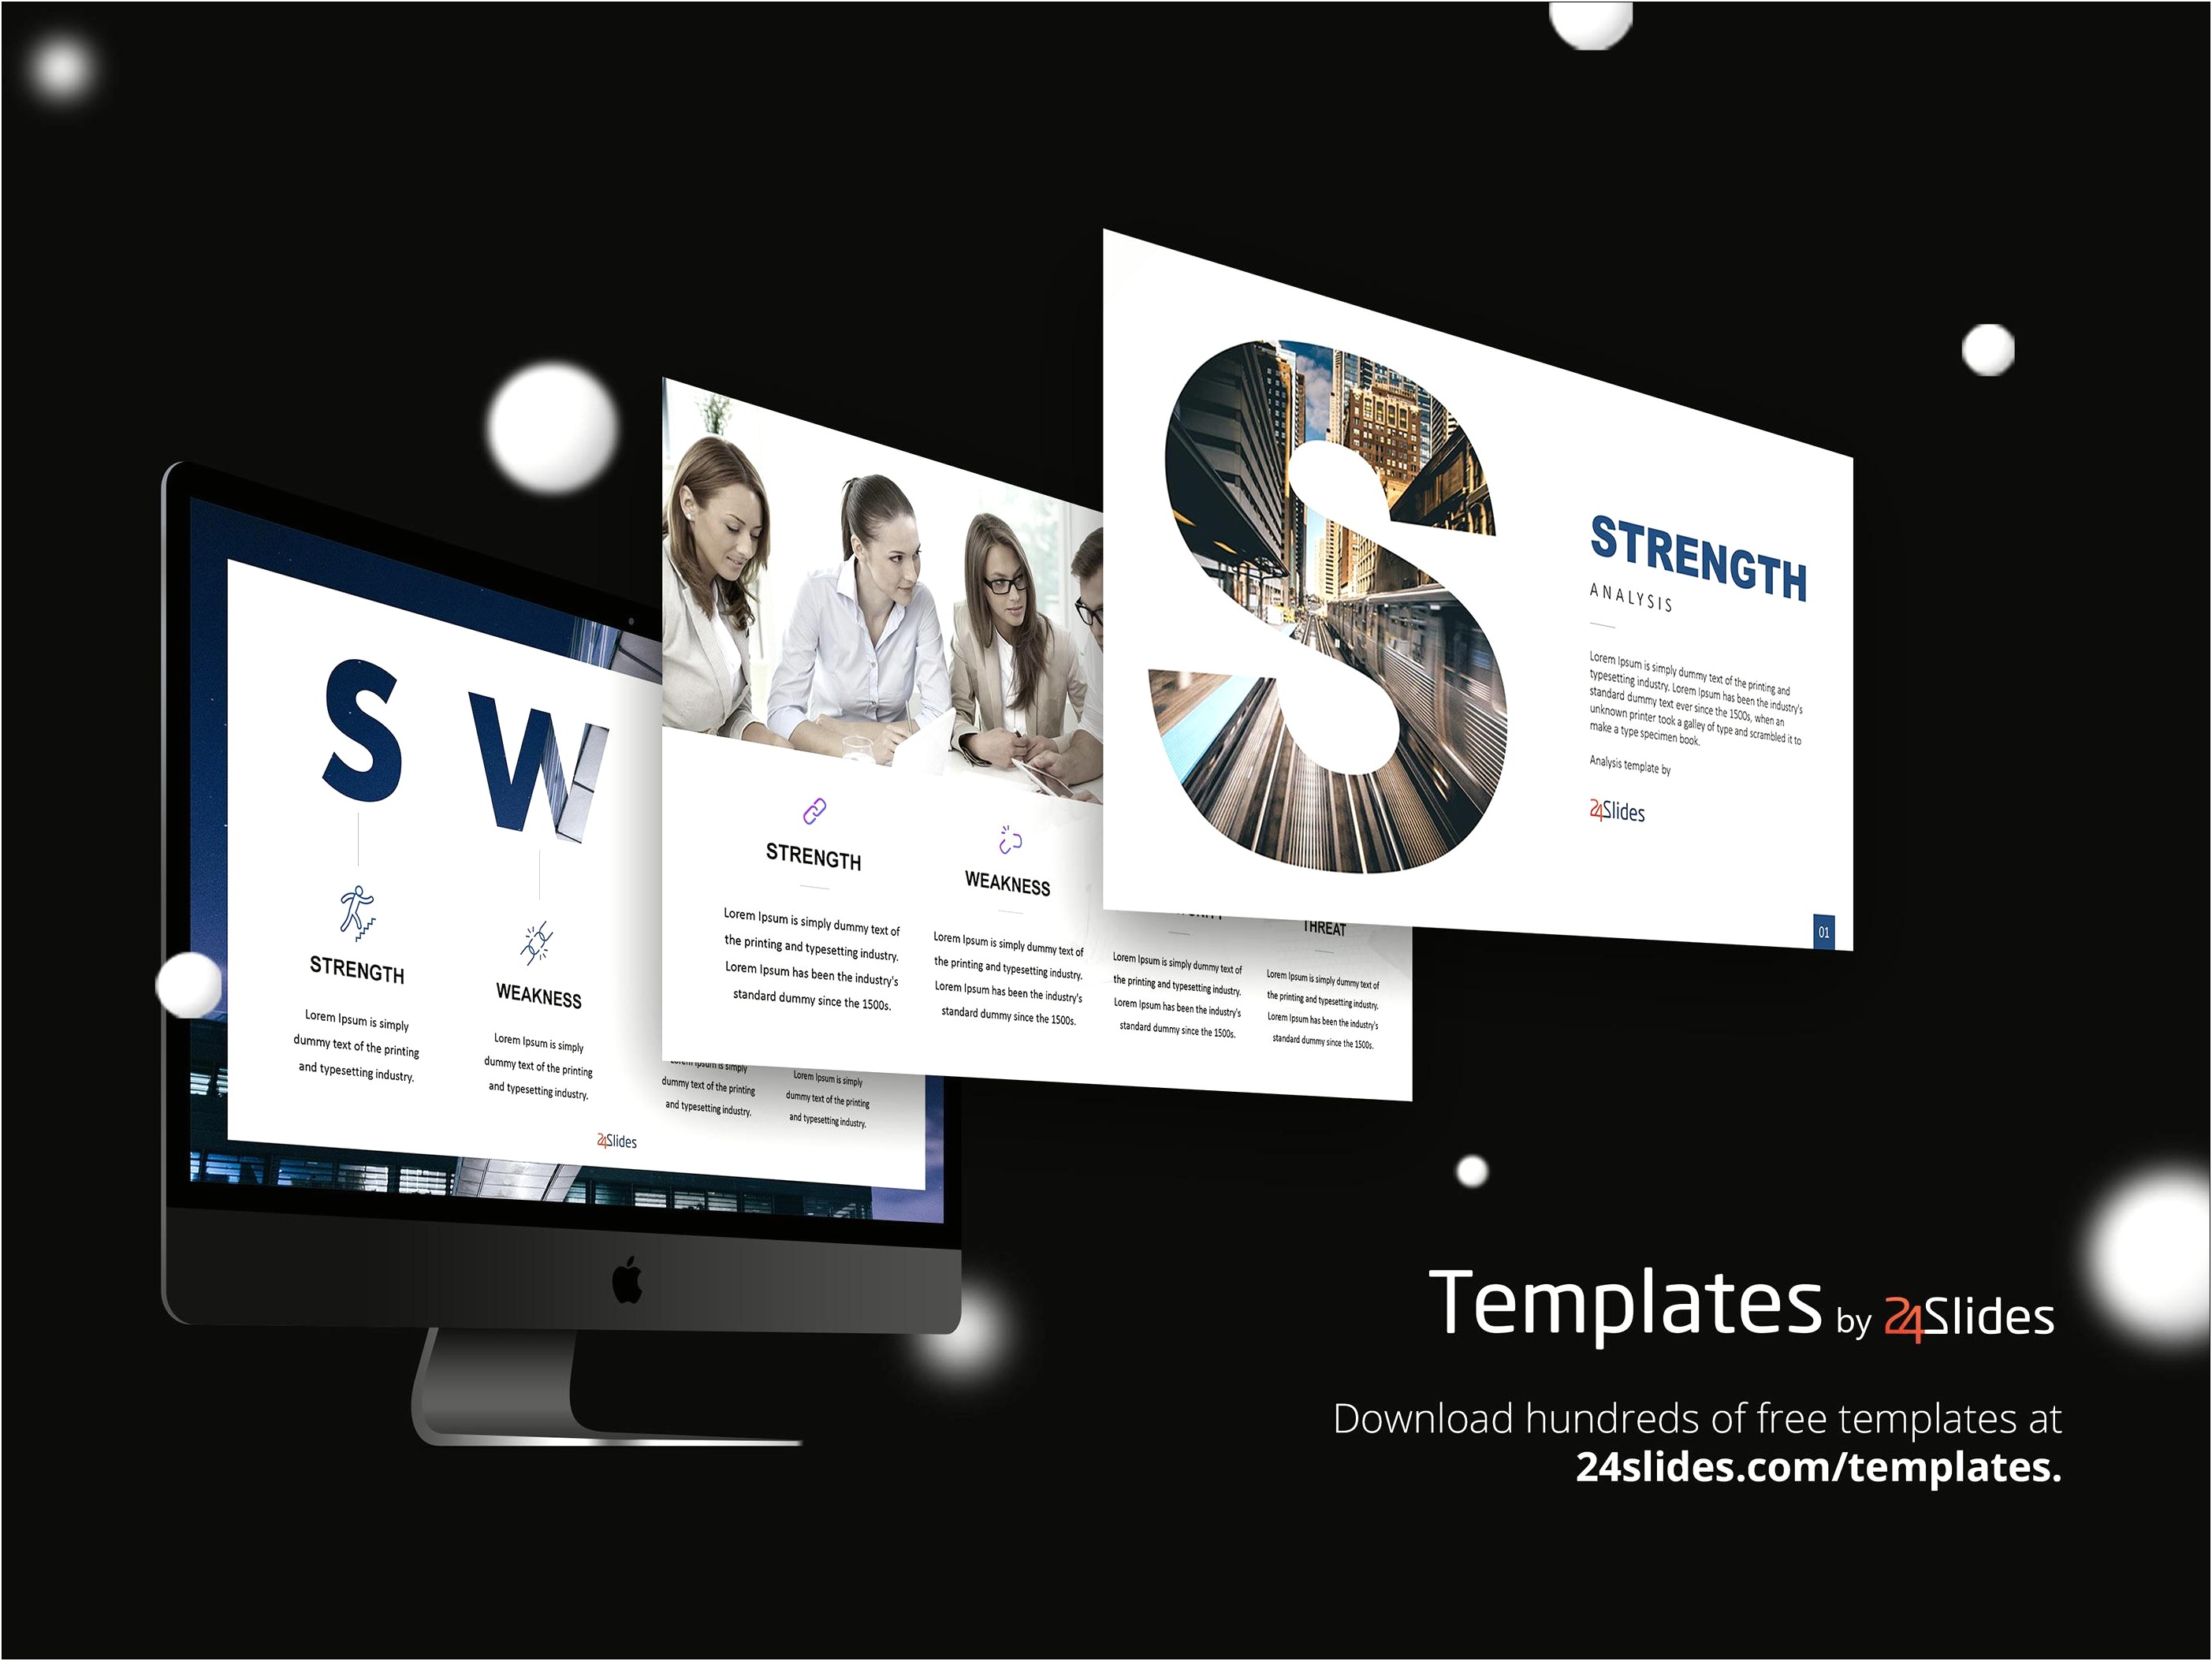 Swot Analysis Ppt Template Free Download